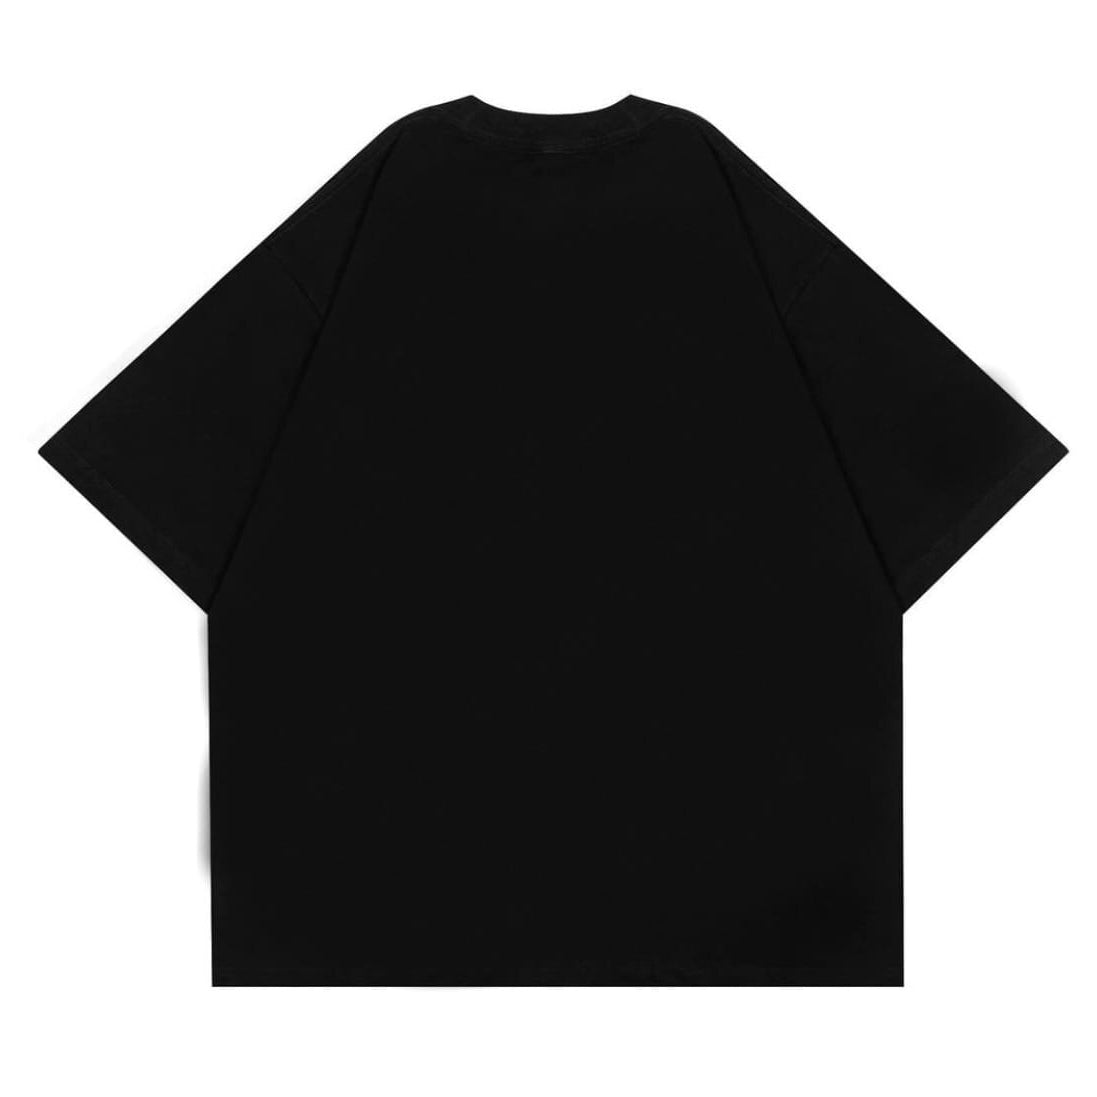 Embrace The Void Oversize T-shirt